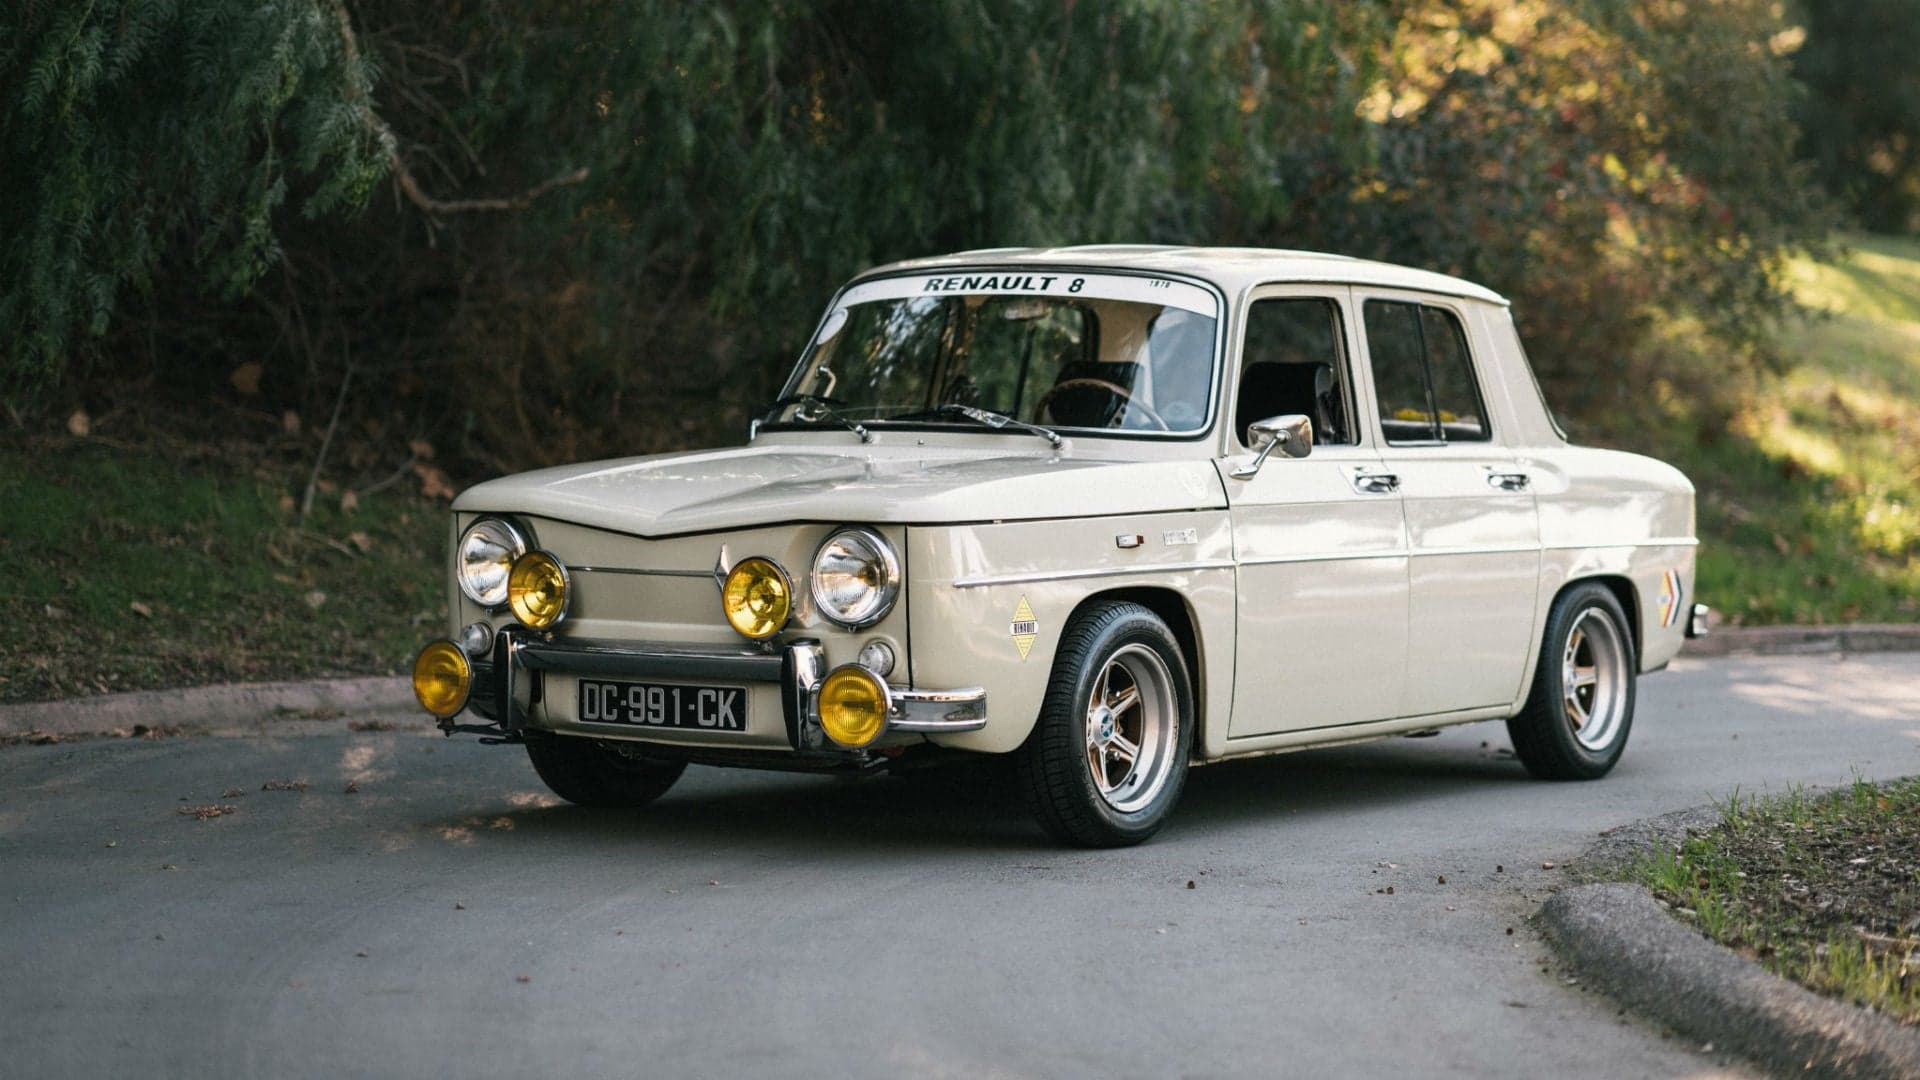 This Imported Renault 8 Makes a Great Vintage Rally Car